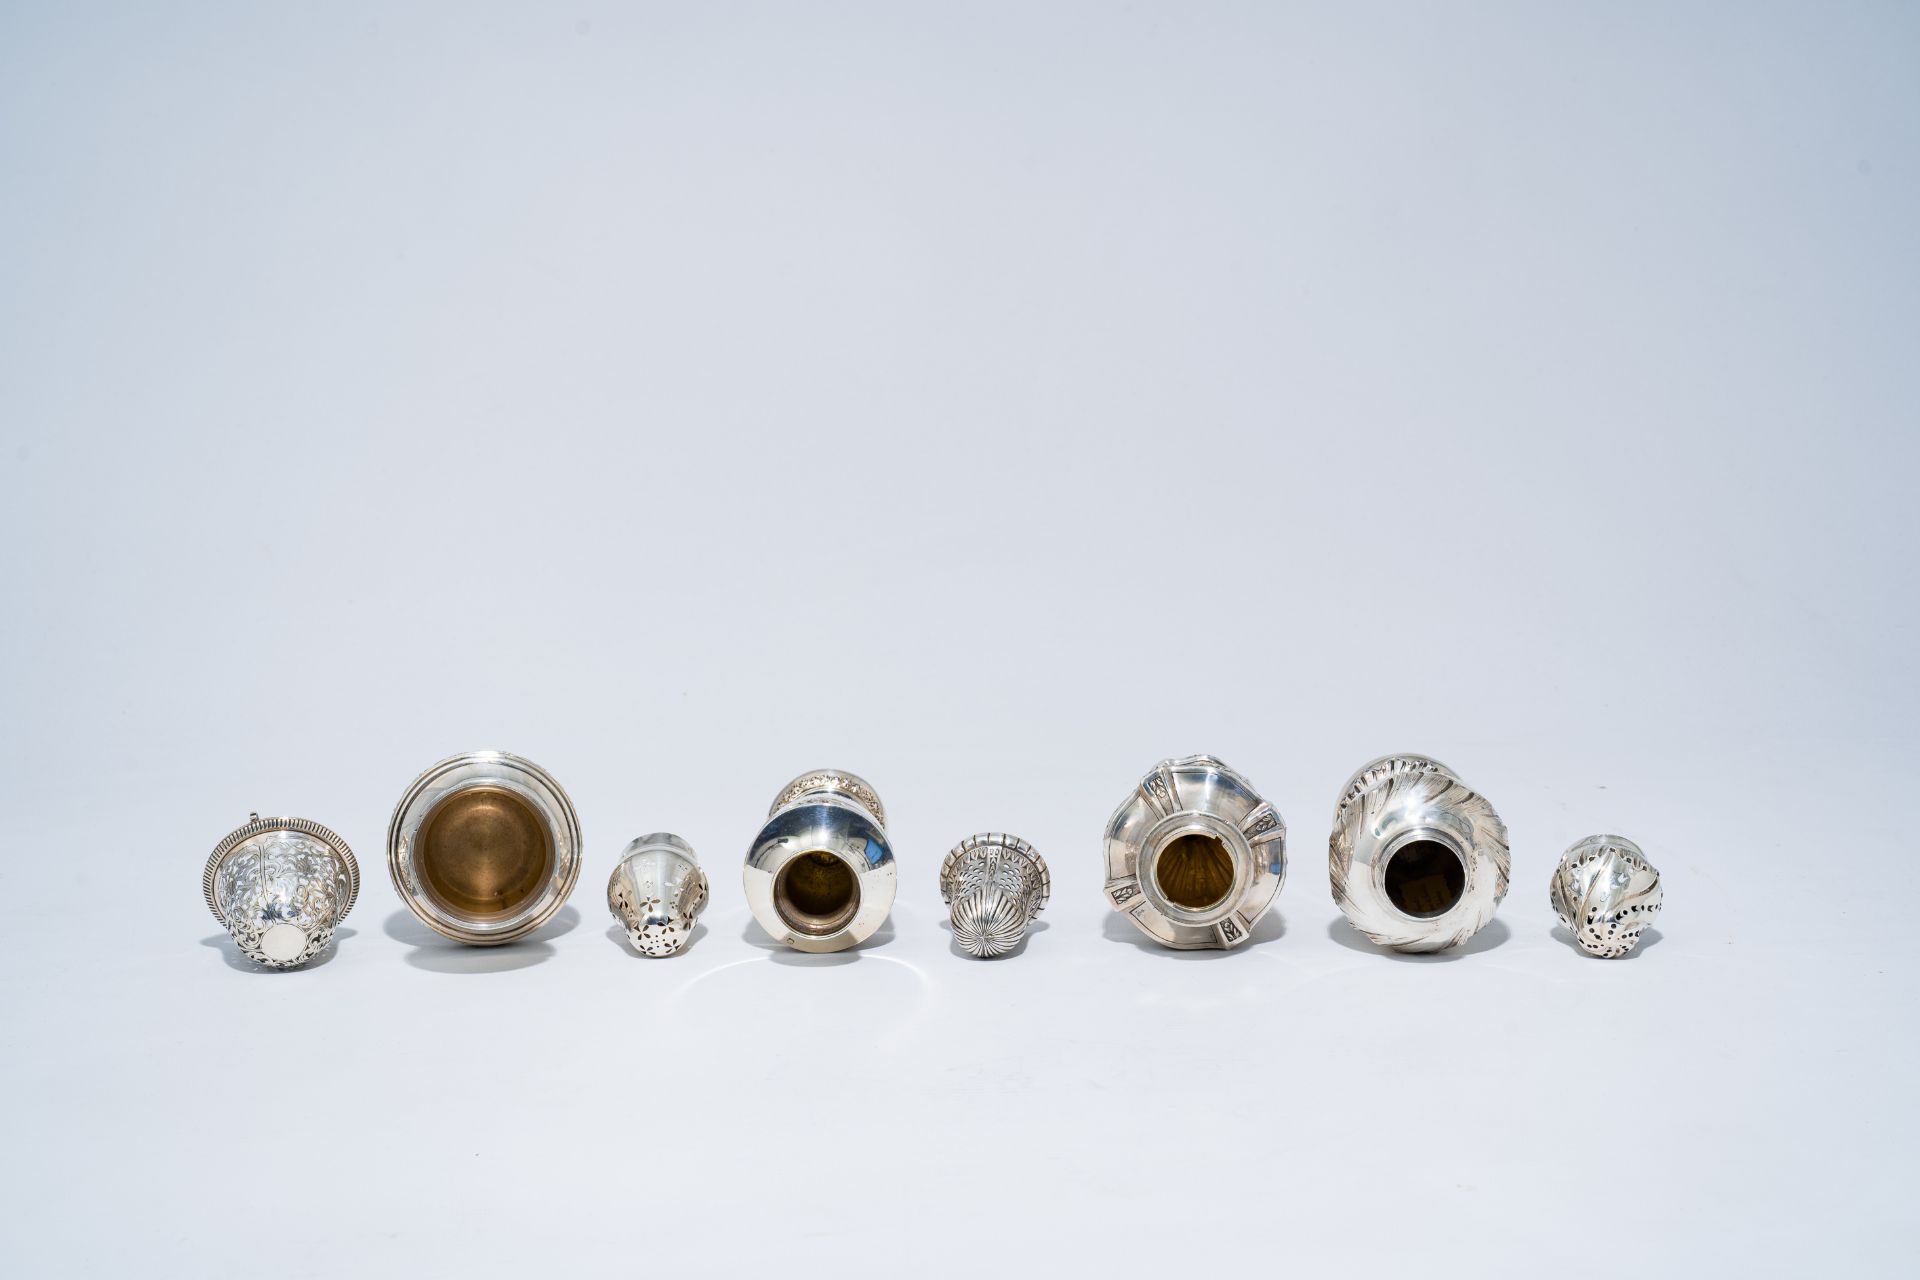 Four various French silver casters with floral design, possibly 18th C. and later - Image 6 of 14